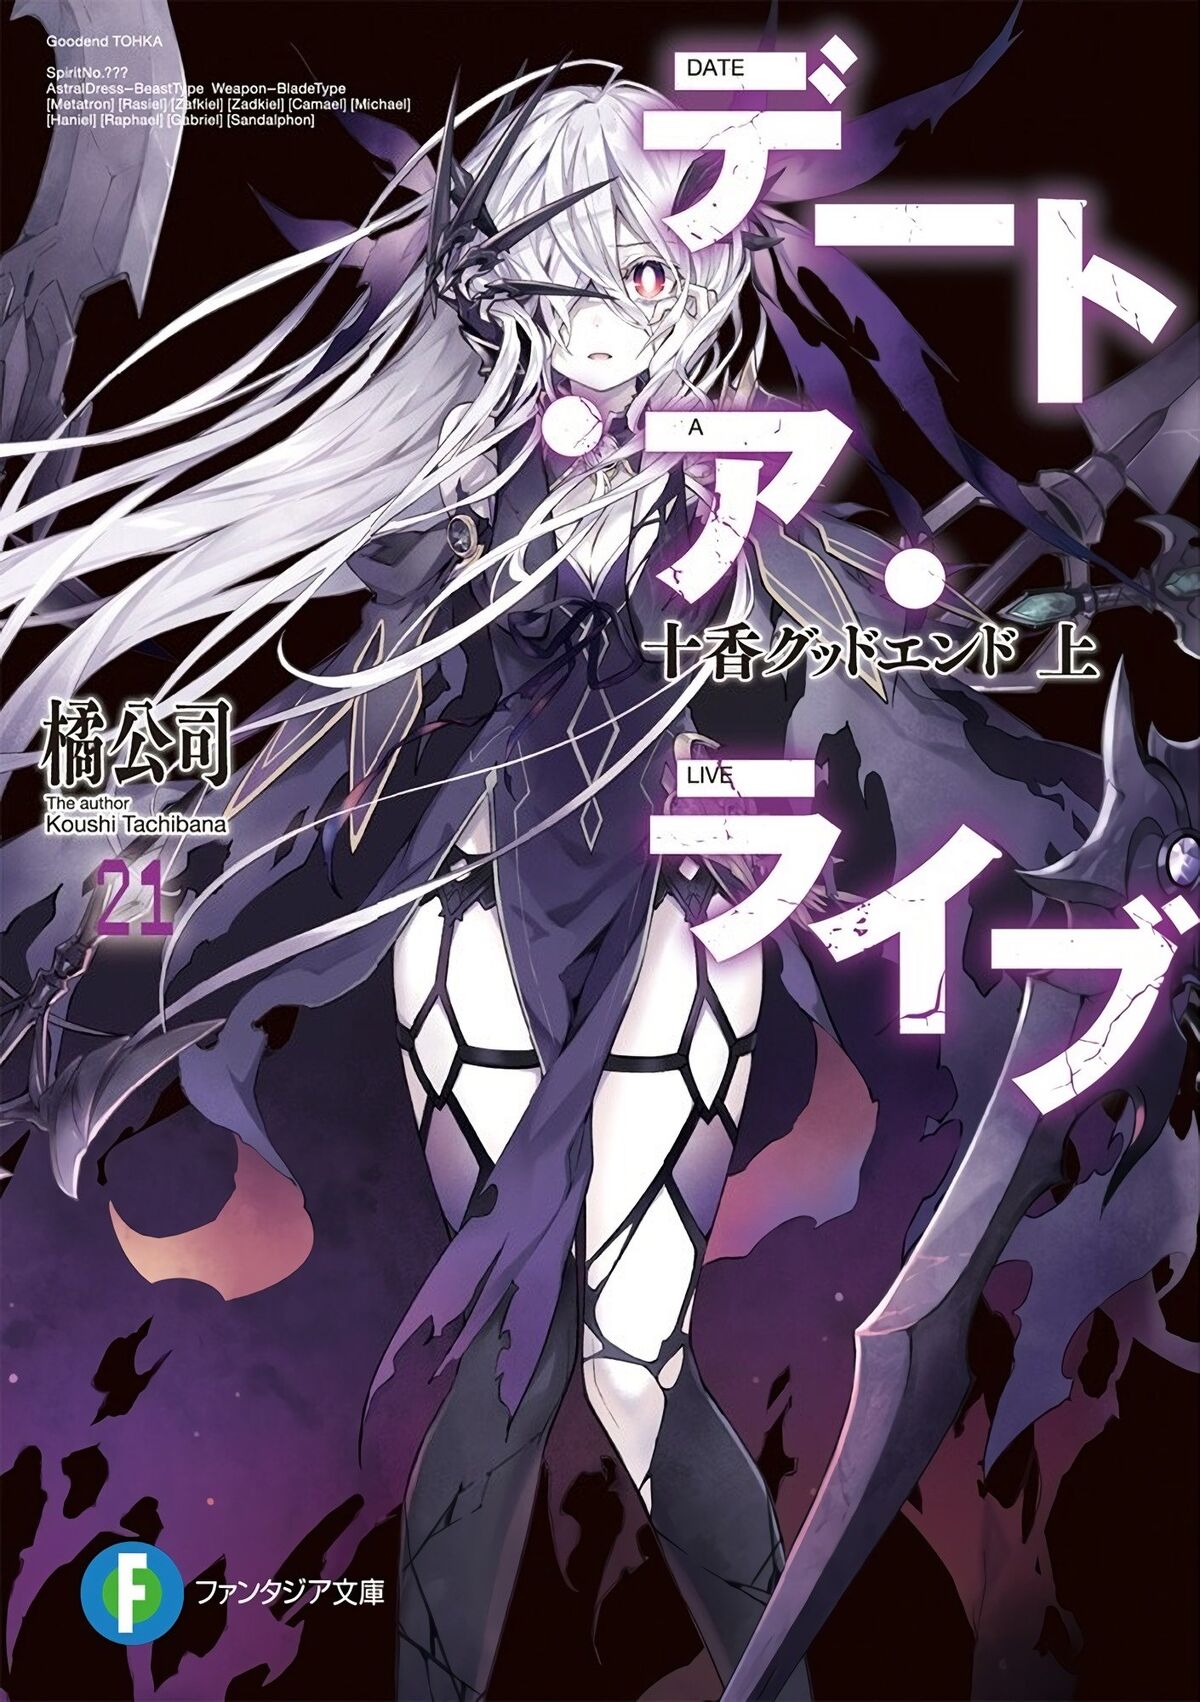 SPOILERS ABOUT THE END  Date A Live LIGHT NOVEL 